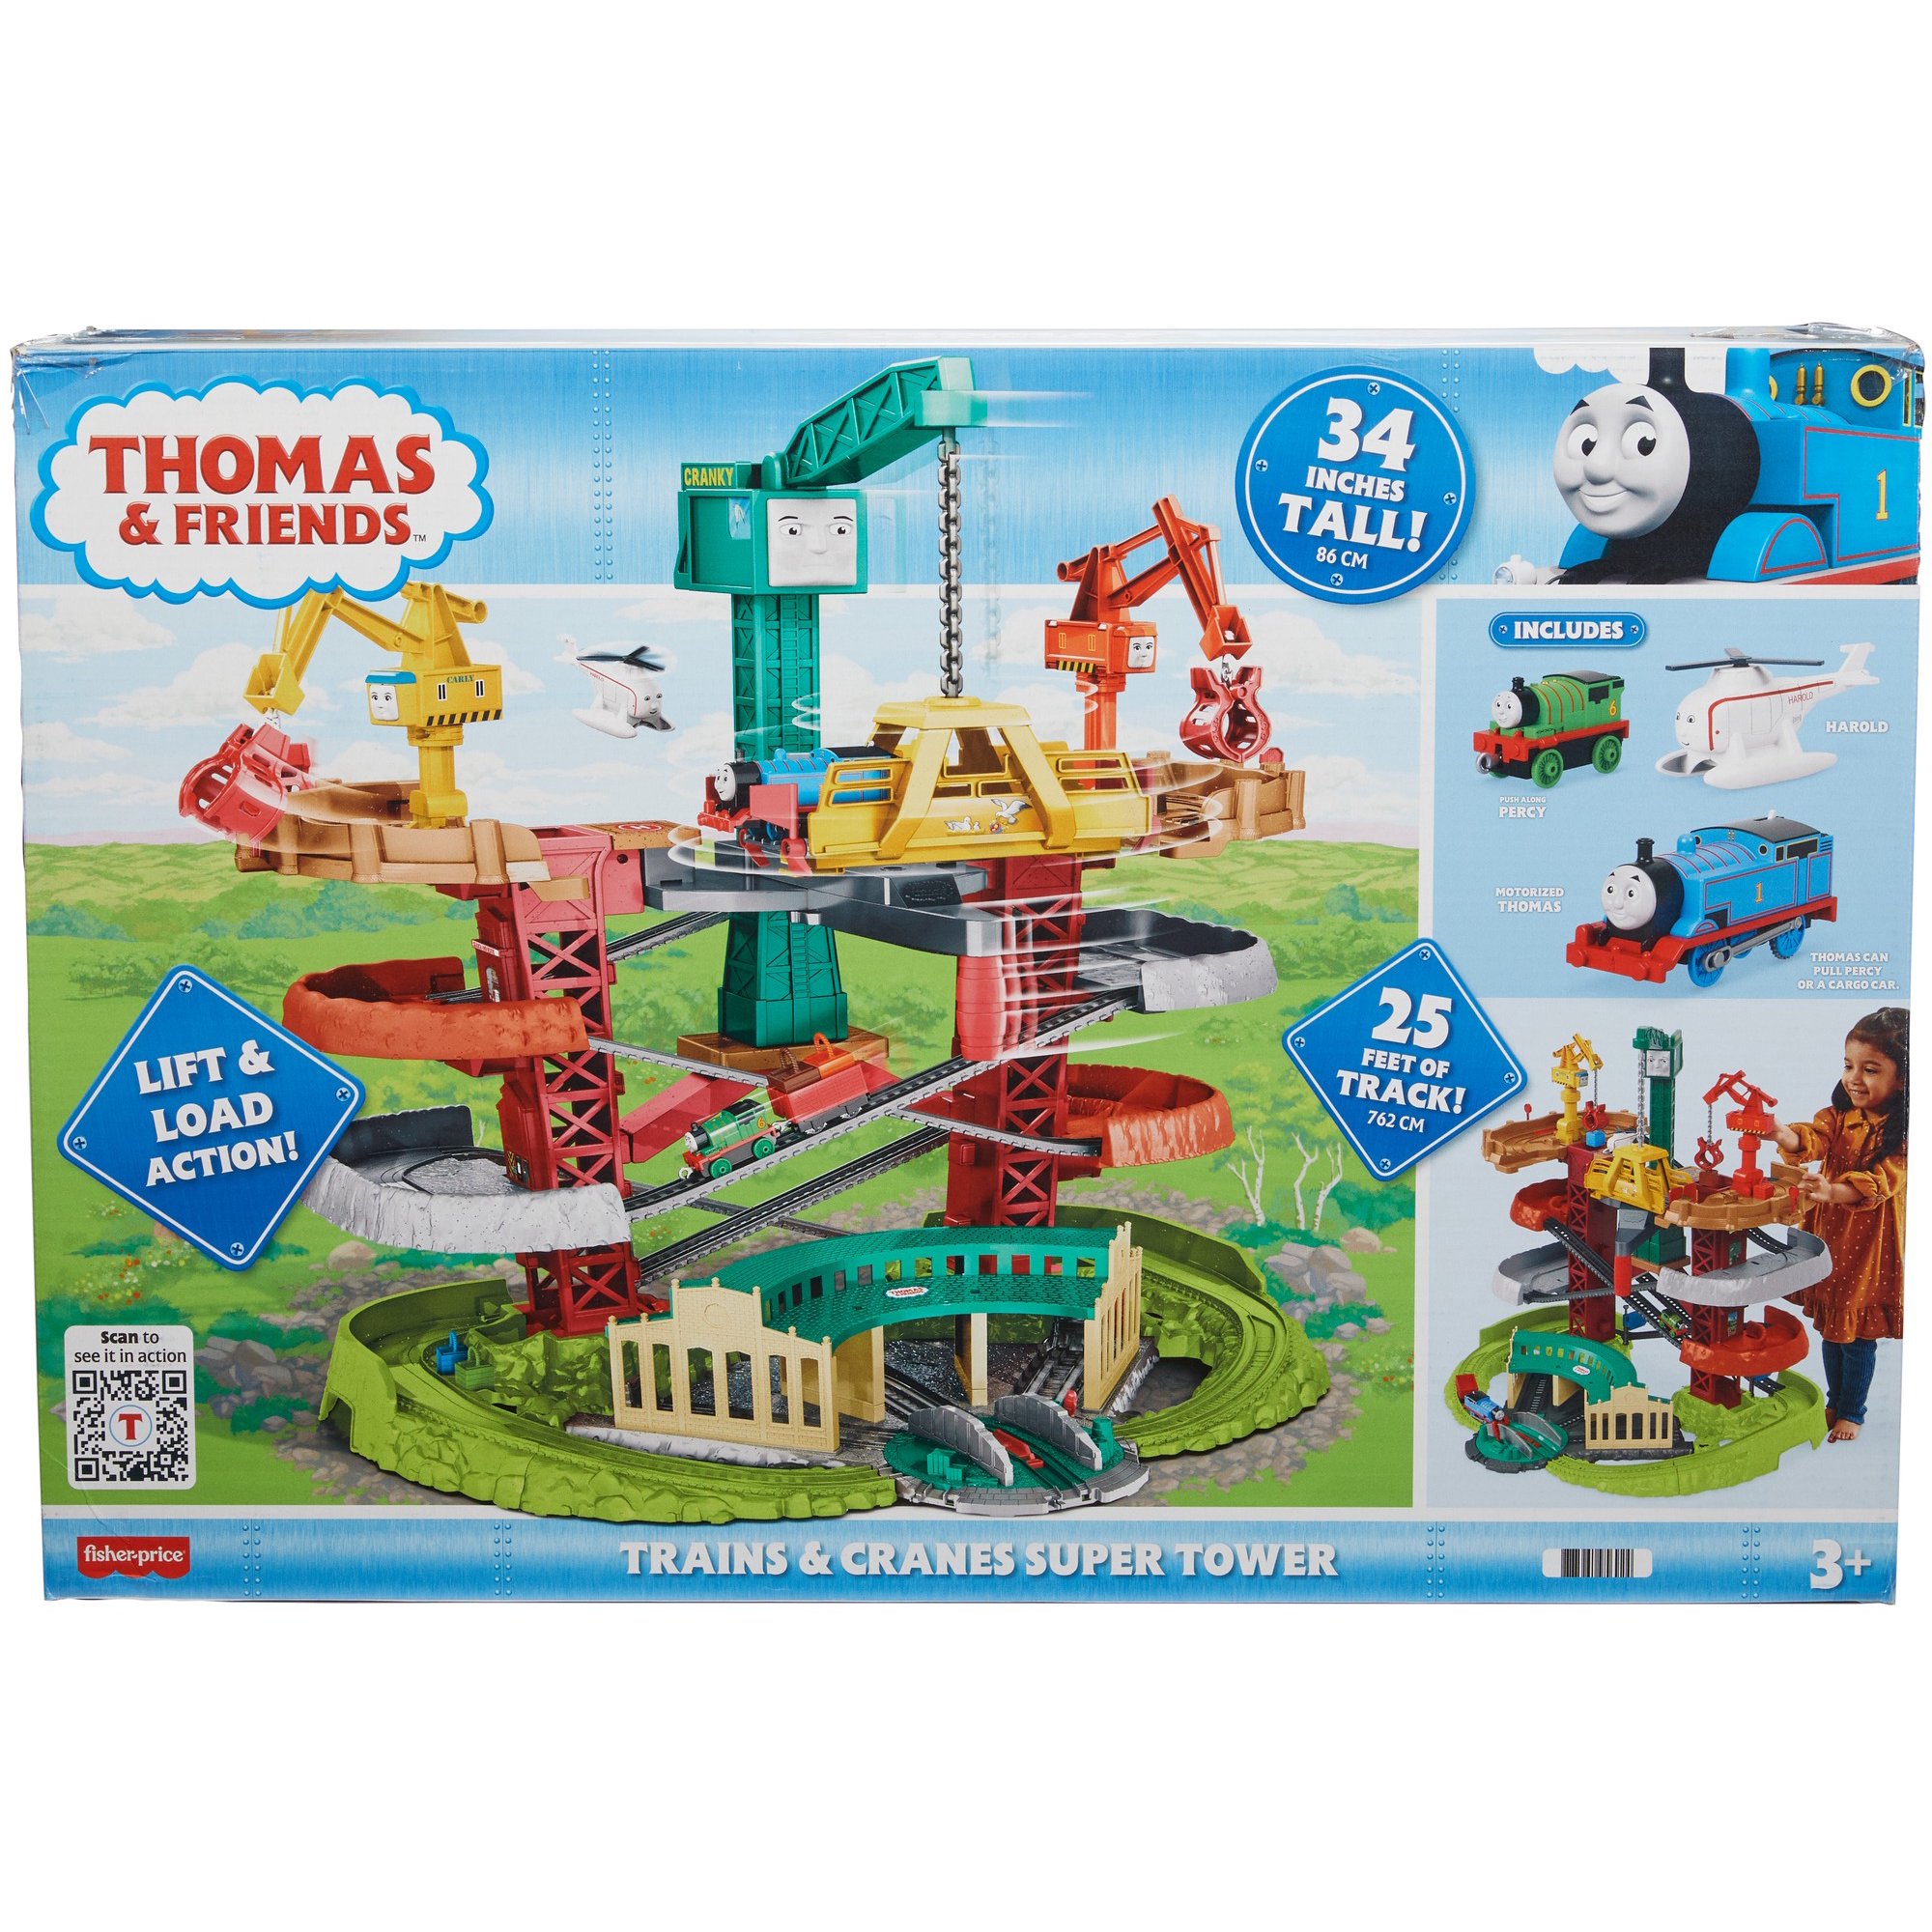 Thomas & Friends Trains & Cranes 34" Tall Super Tower Motorized Playset $66.40 + Free Shipping